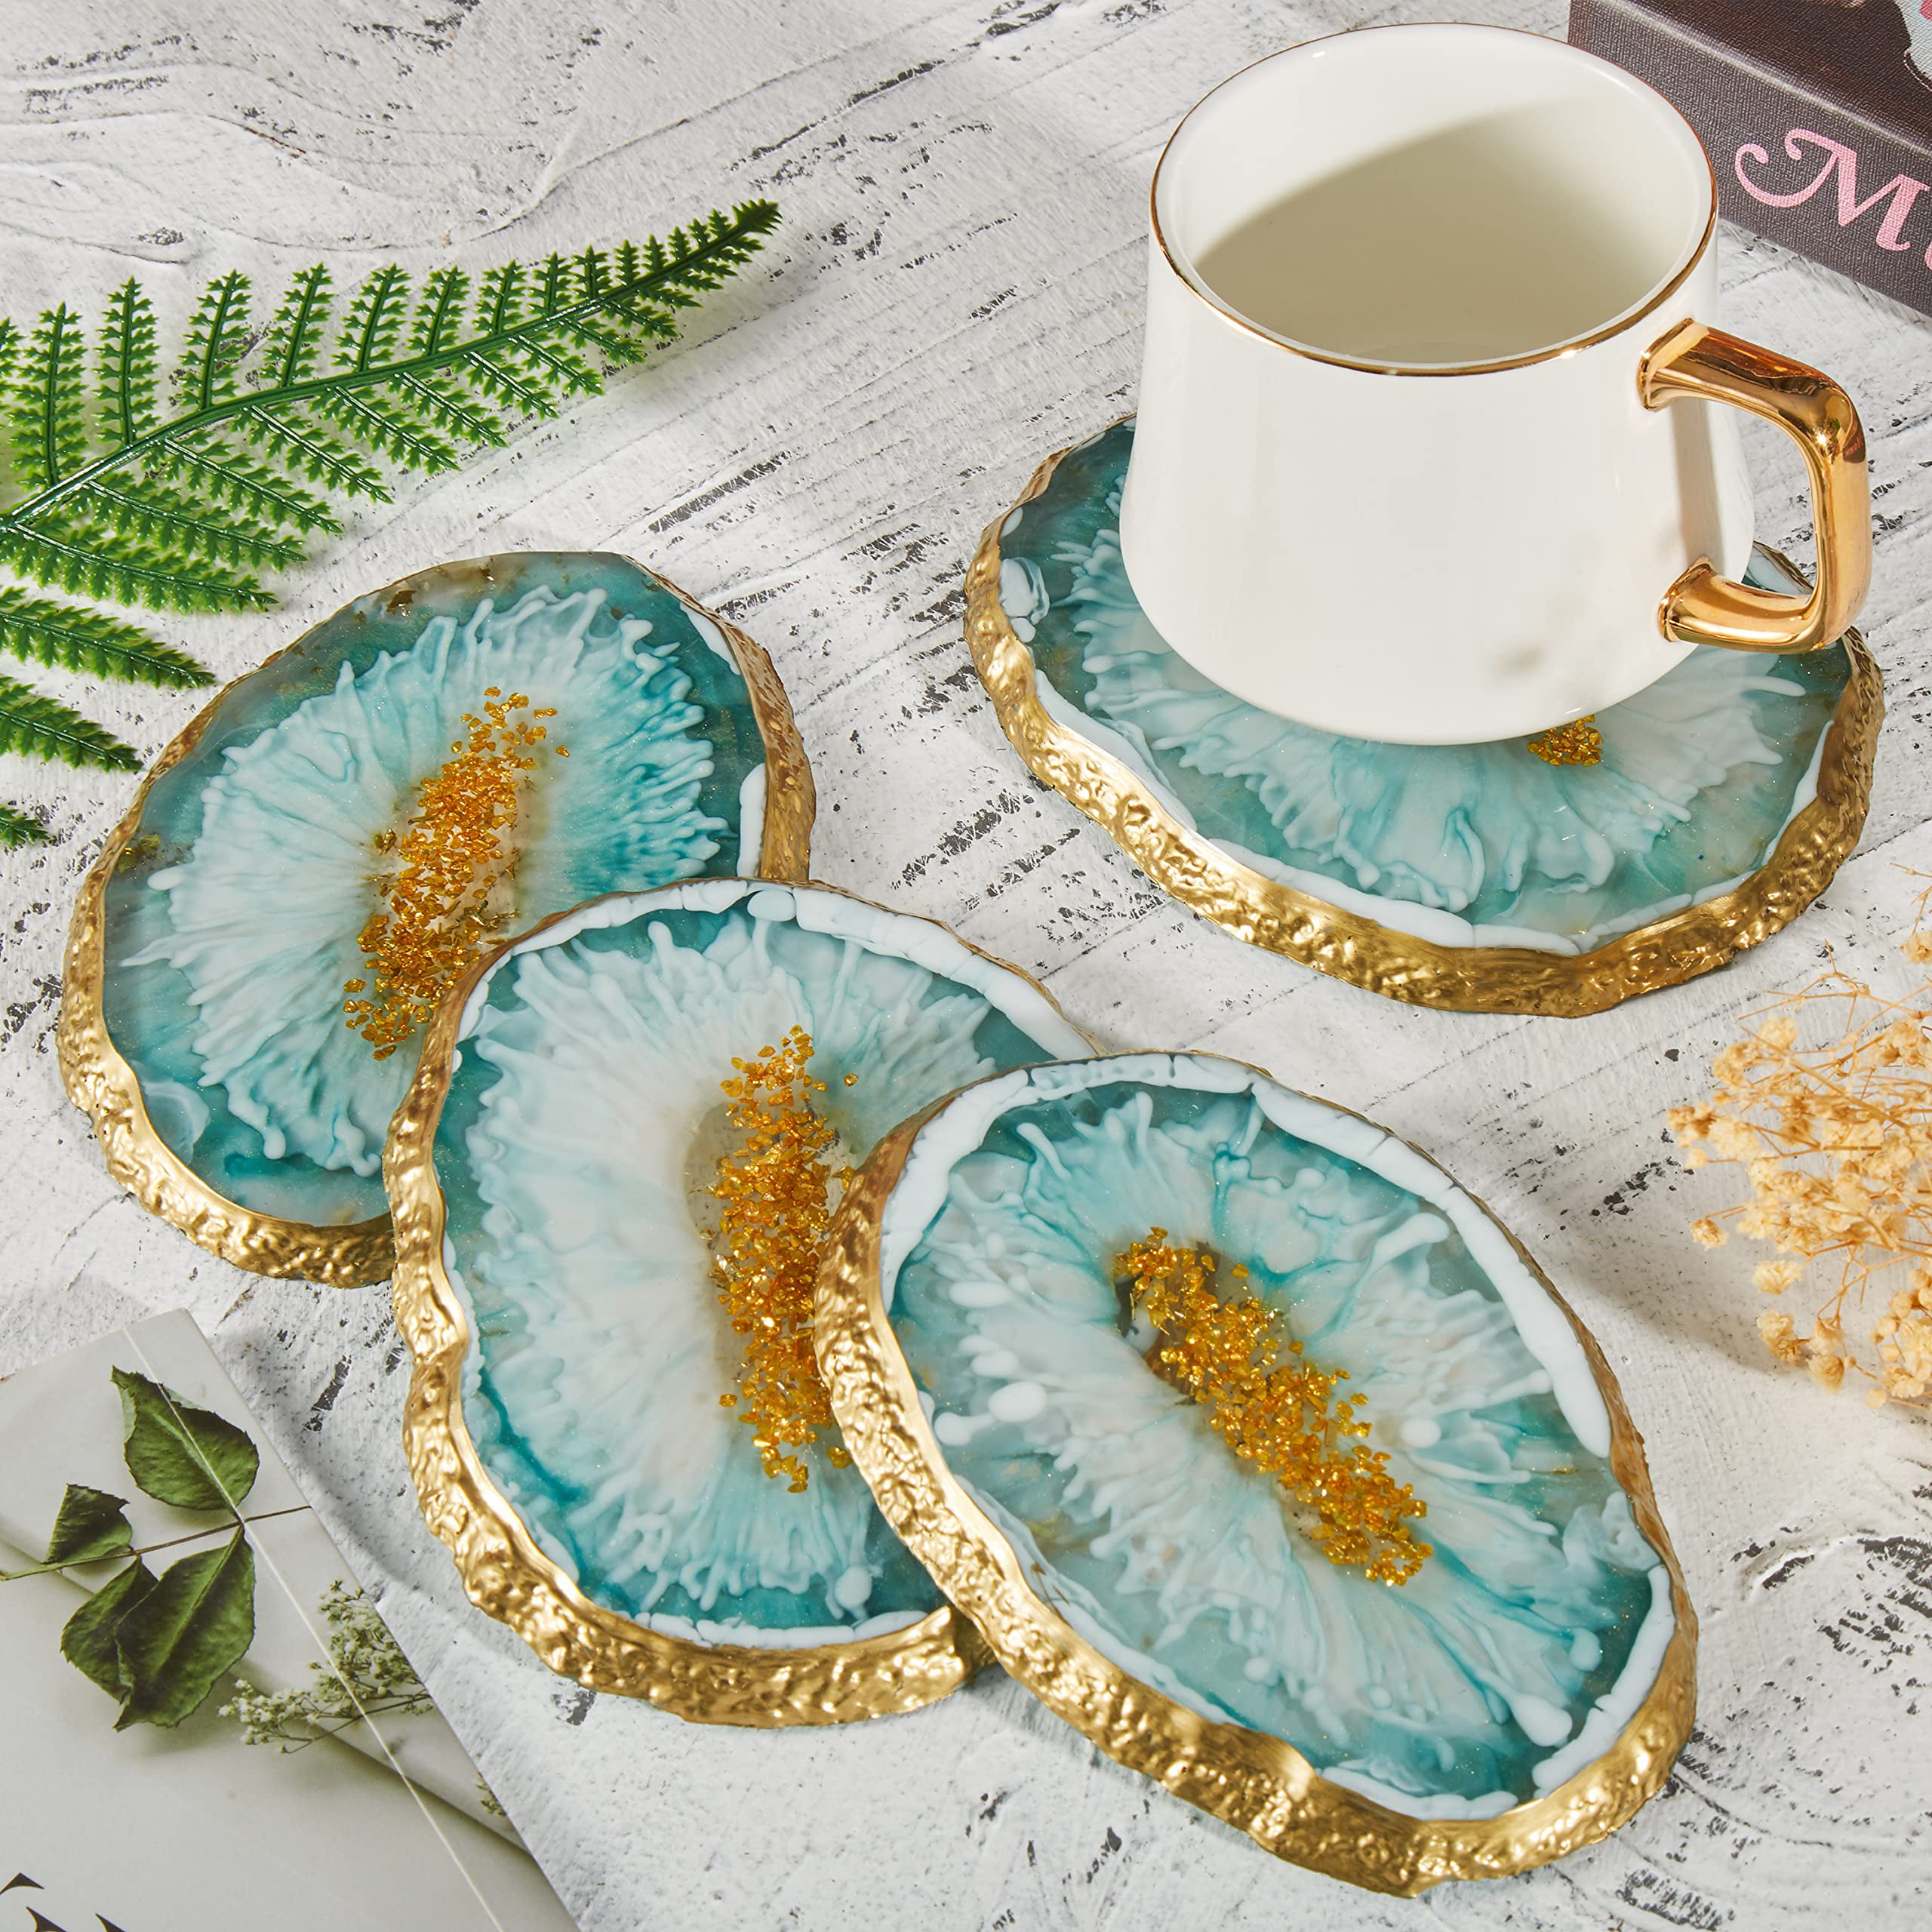 Resin Coaster Molds for Epoxy Resin4pcs Geode Coaster Mold with